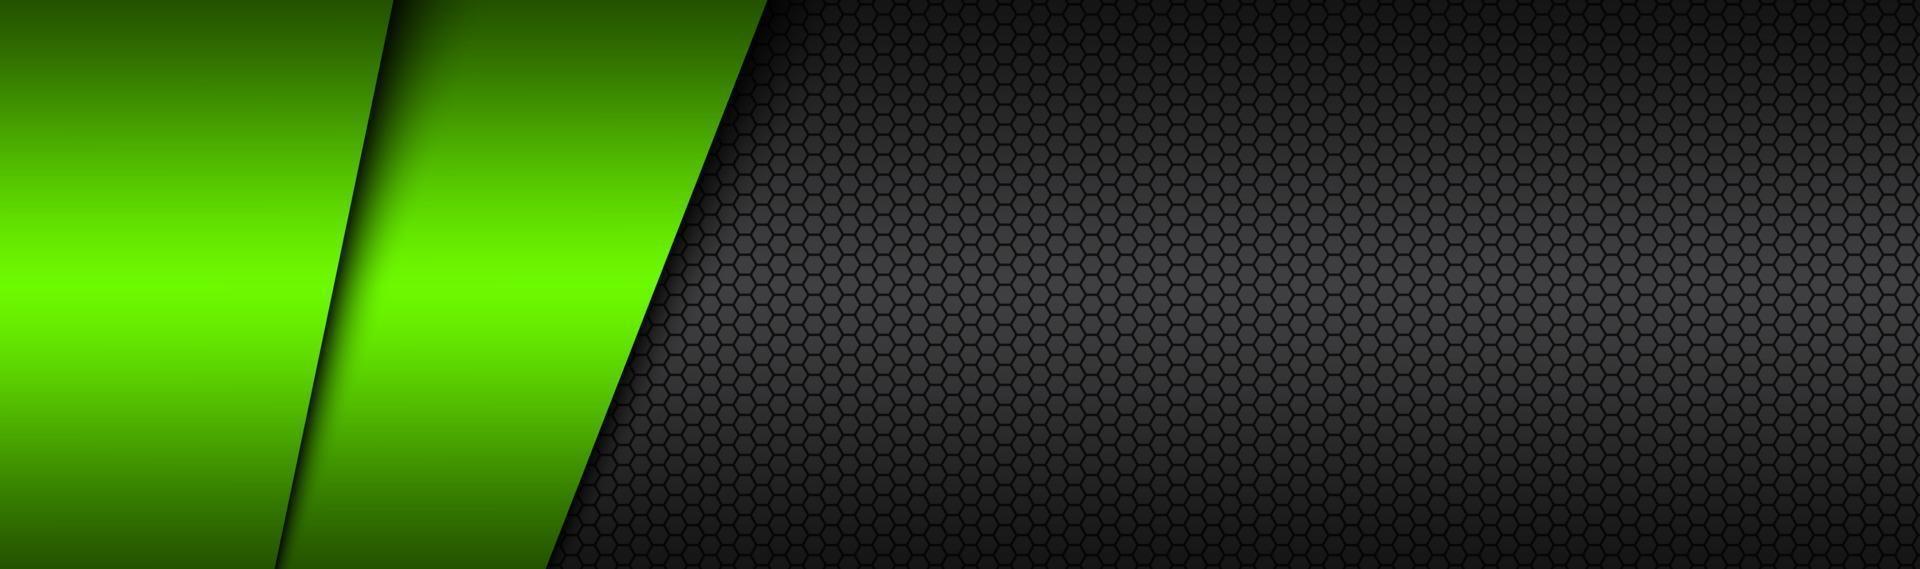 Black and green modern material vector header with a hexagonal mesh Design banner with polygonal grid and blank space for your logo Abstract website design